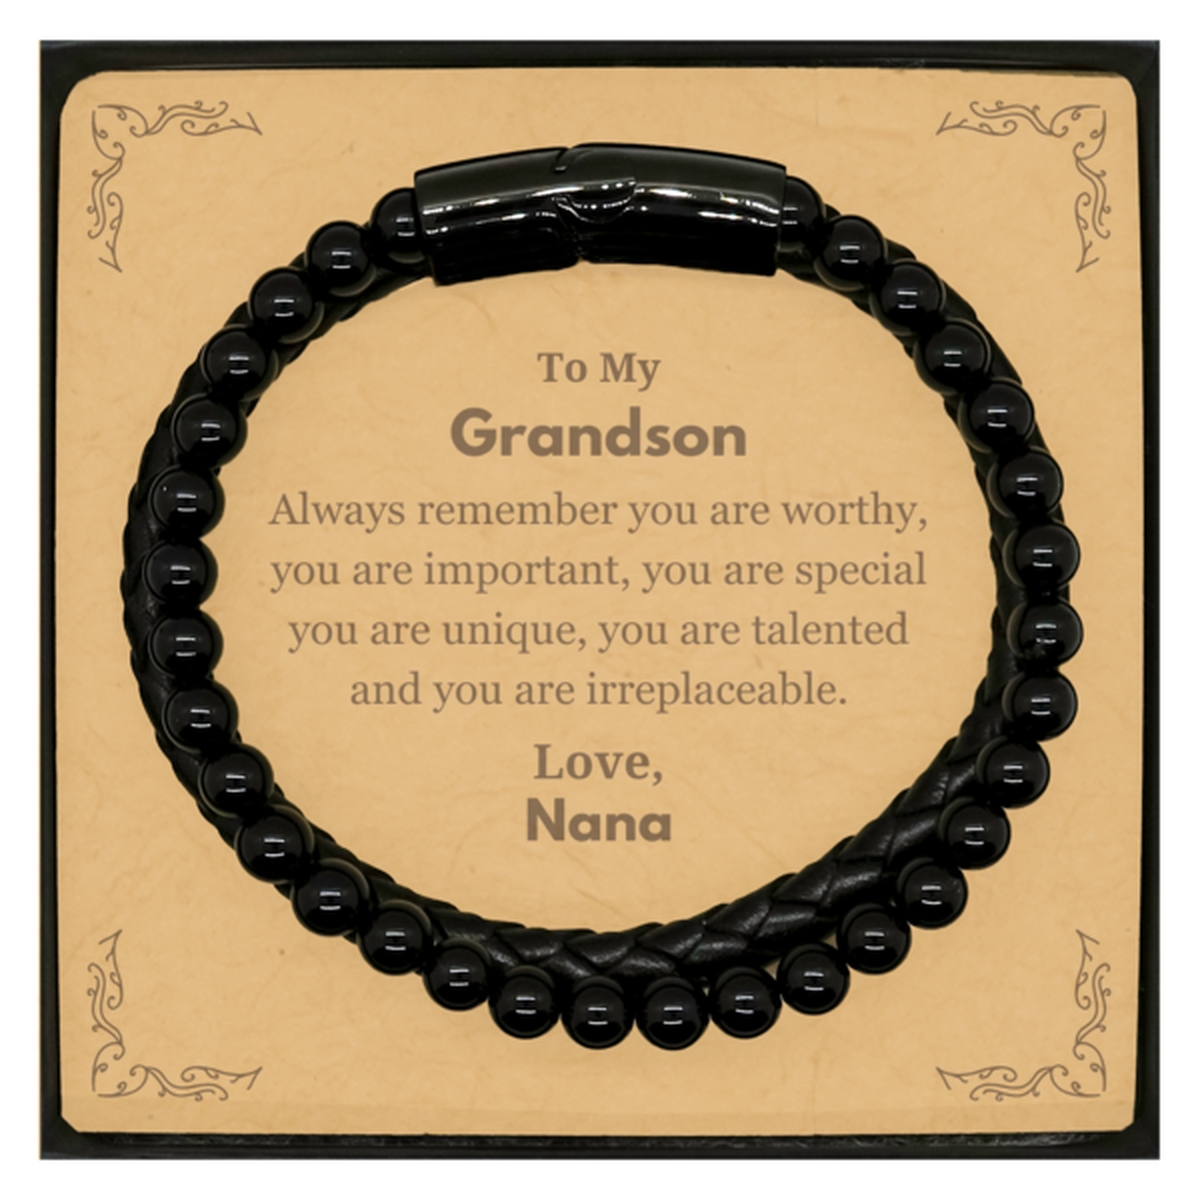 Grandson Birthday Gifts from Nana, Inspirational Stone Leather Bracelets for Grandson Christmas Graduation Gifts for Grandson Always remember you are worthy, you are important. Love, Nana